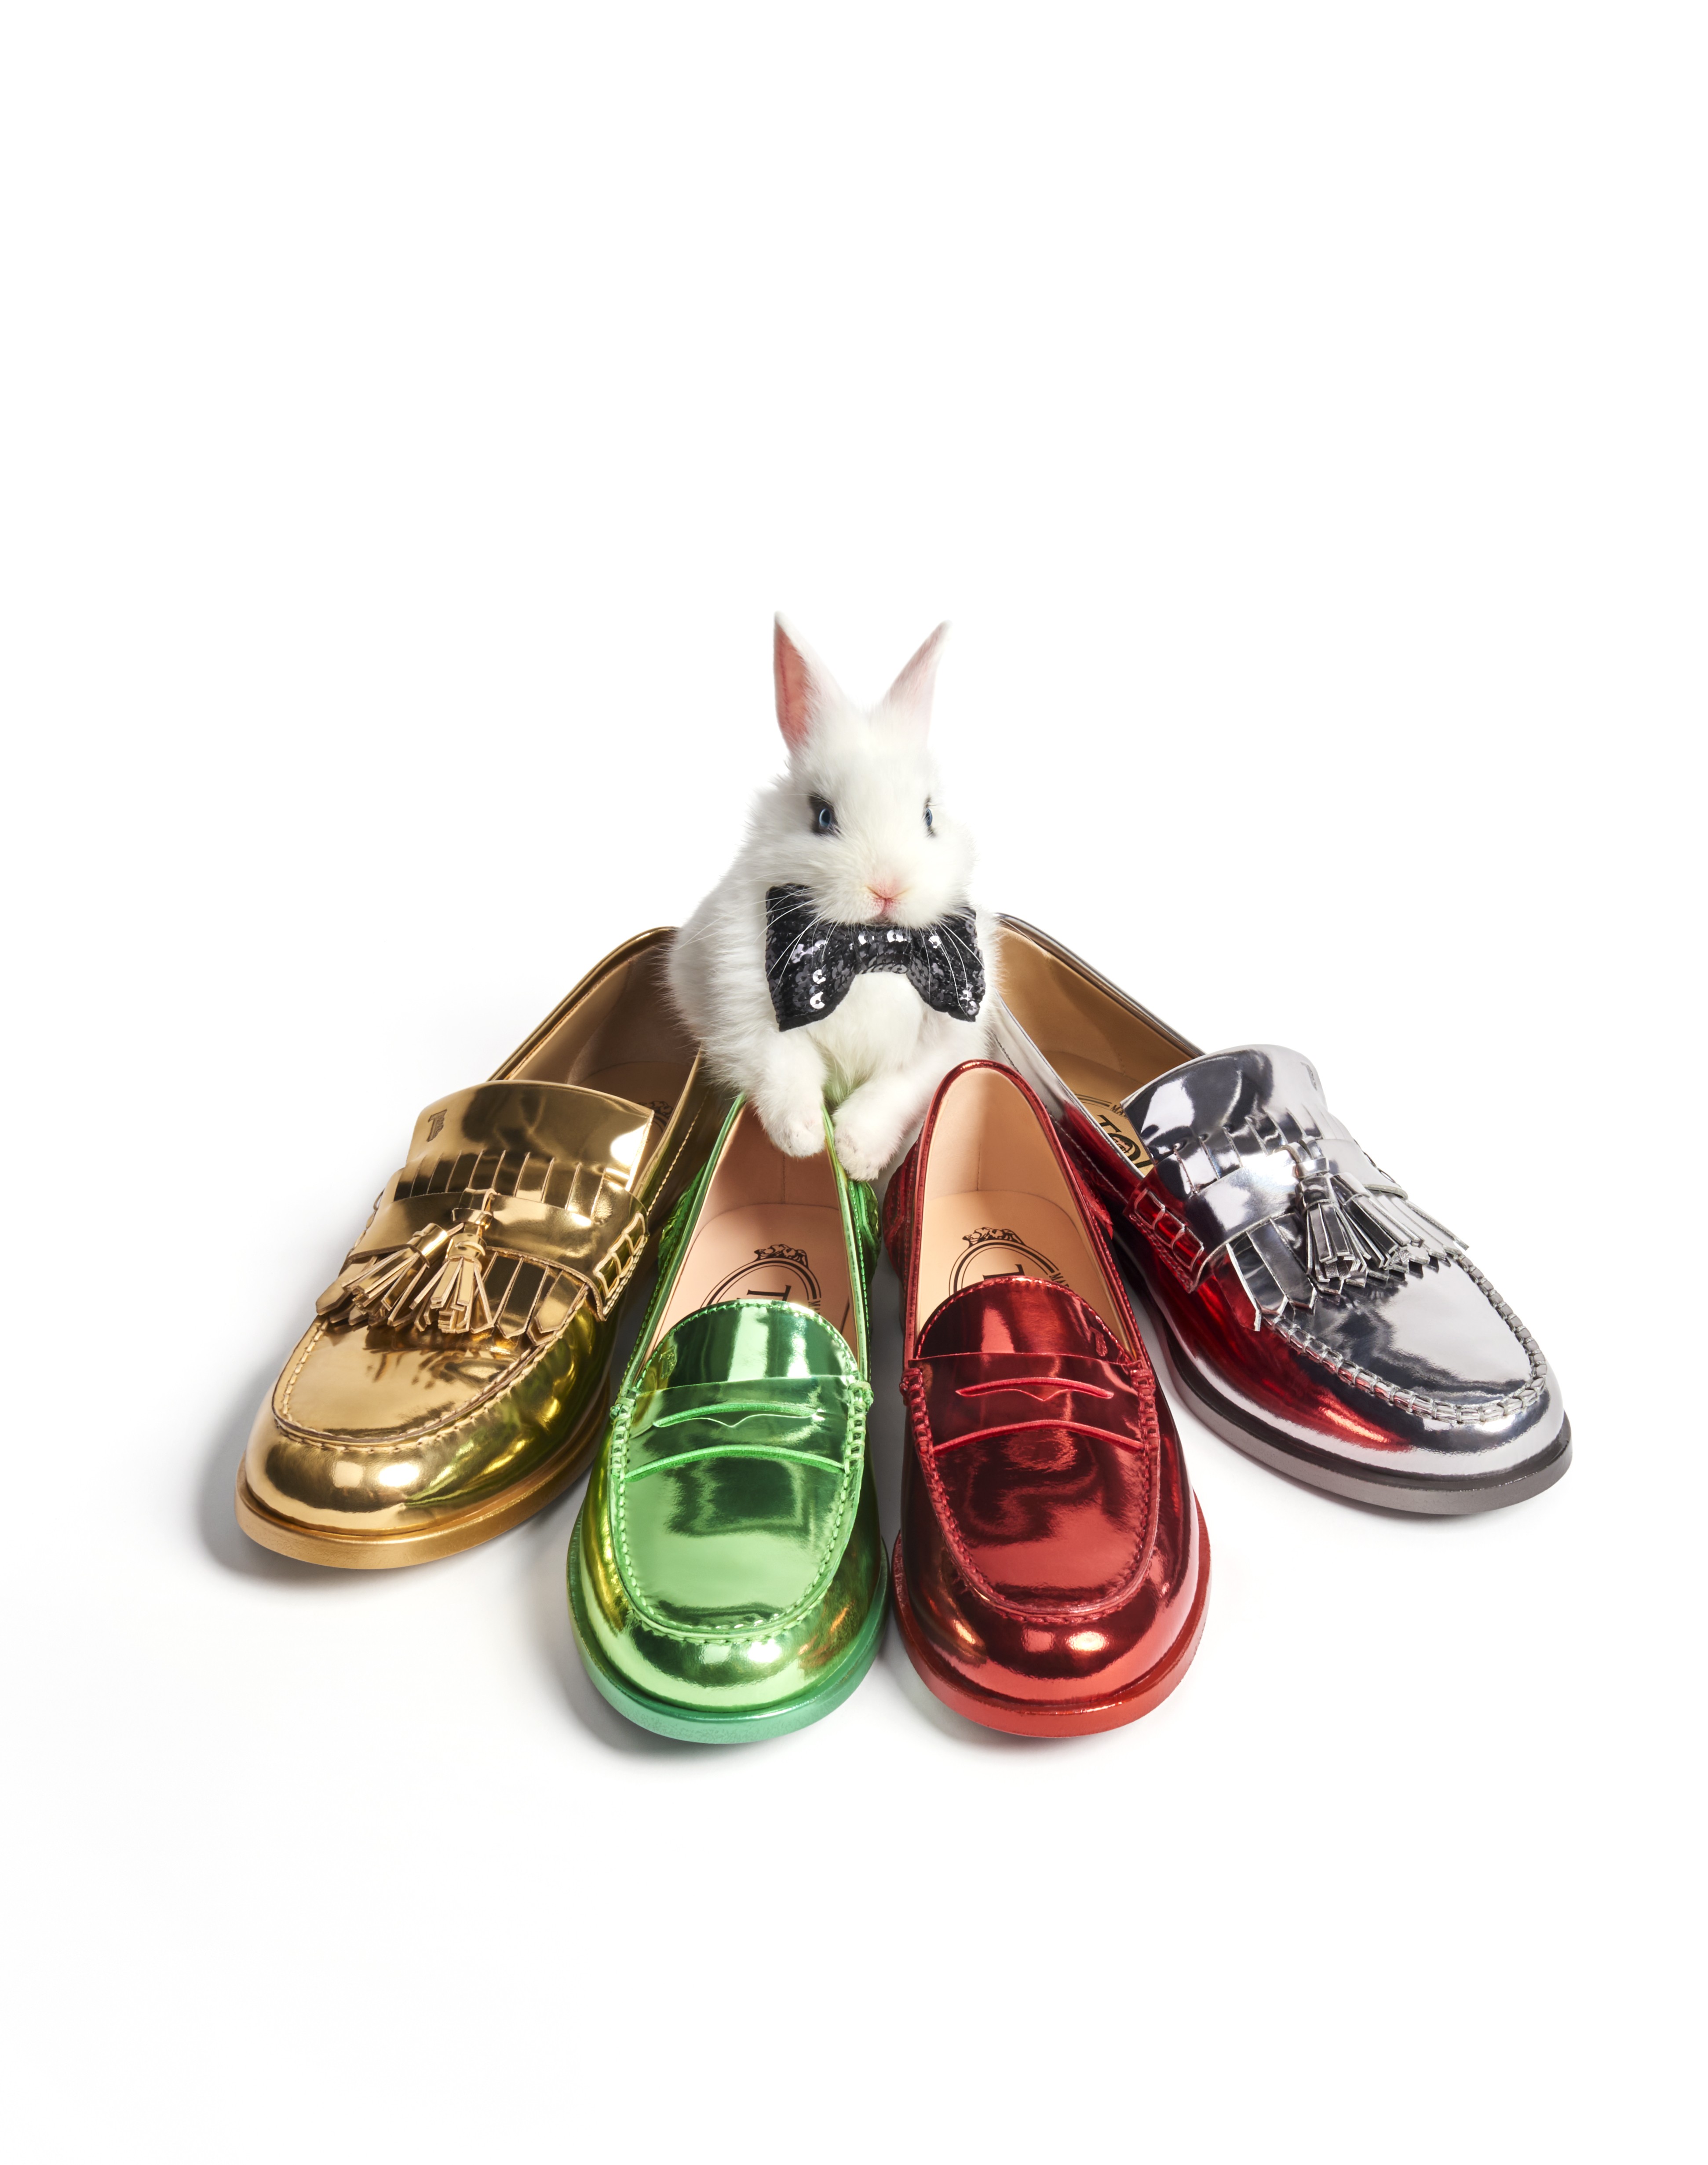 Tod’s collaborated with Alber Elbaz on the Happy Moments collection after Diego Della Valle, chairman and CEO of Tod’s Group, bonded with Elbaz over ‘food and fashion’.